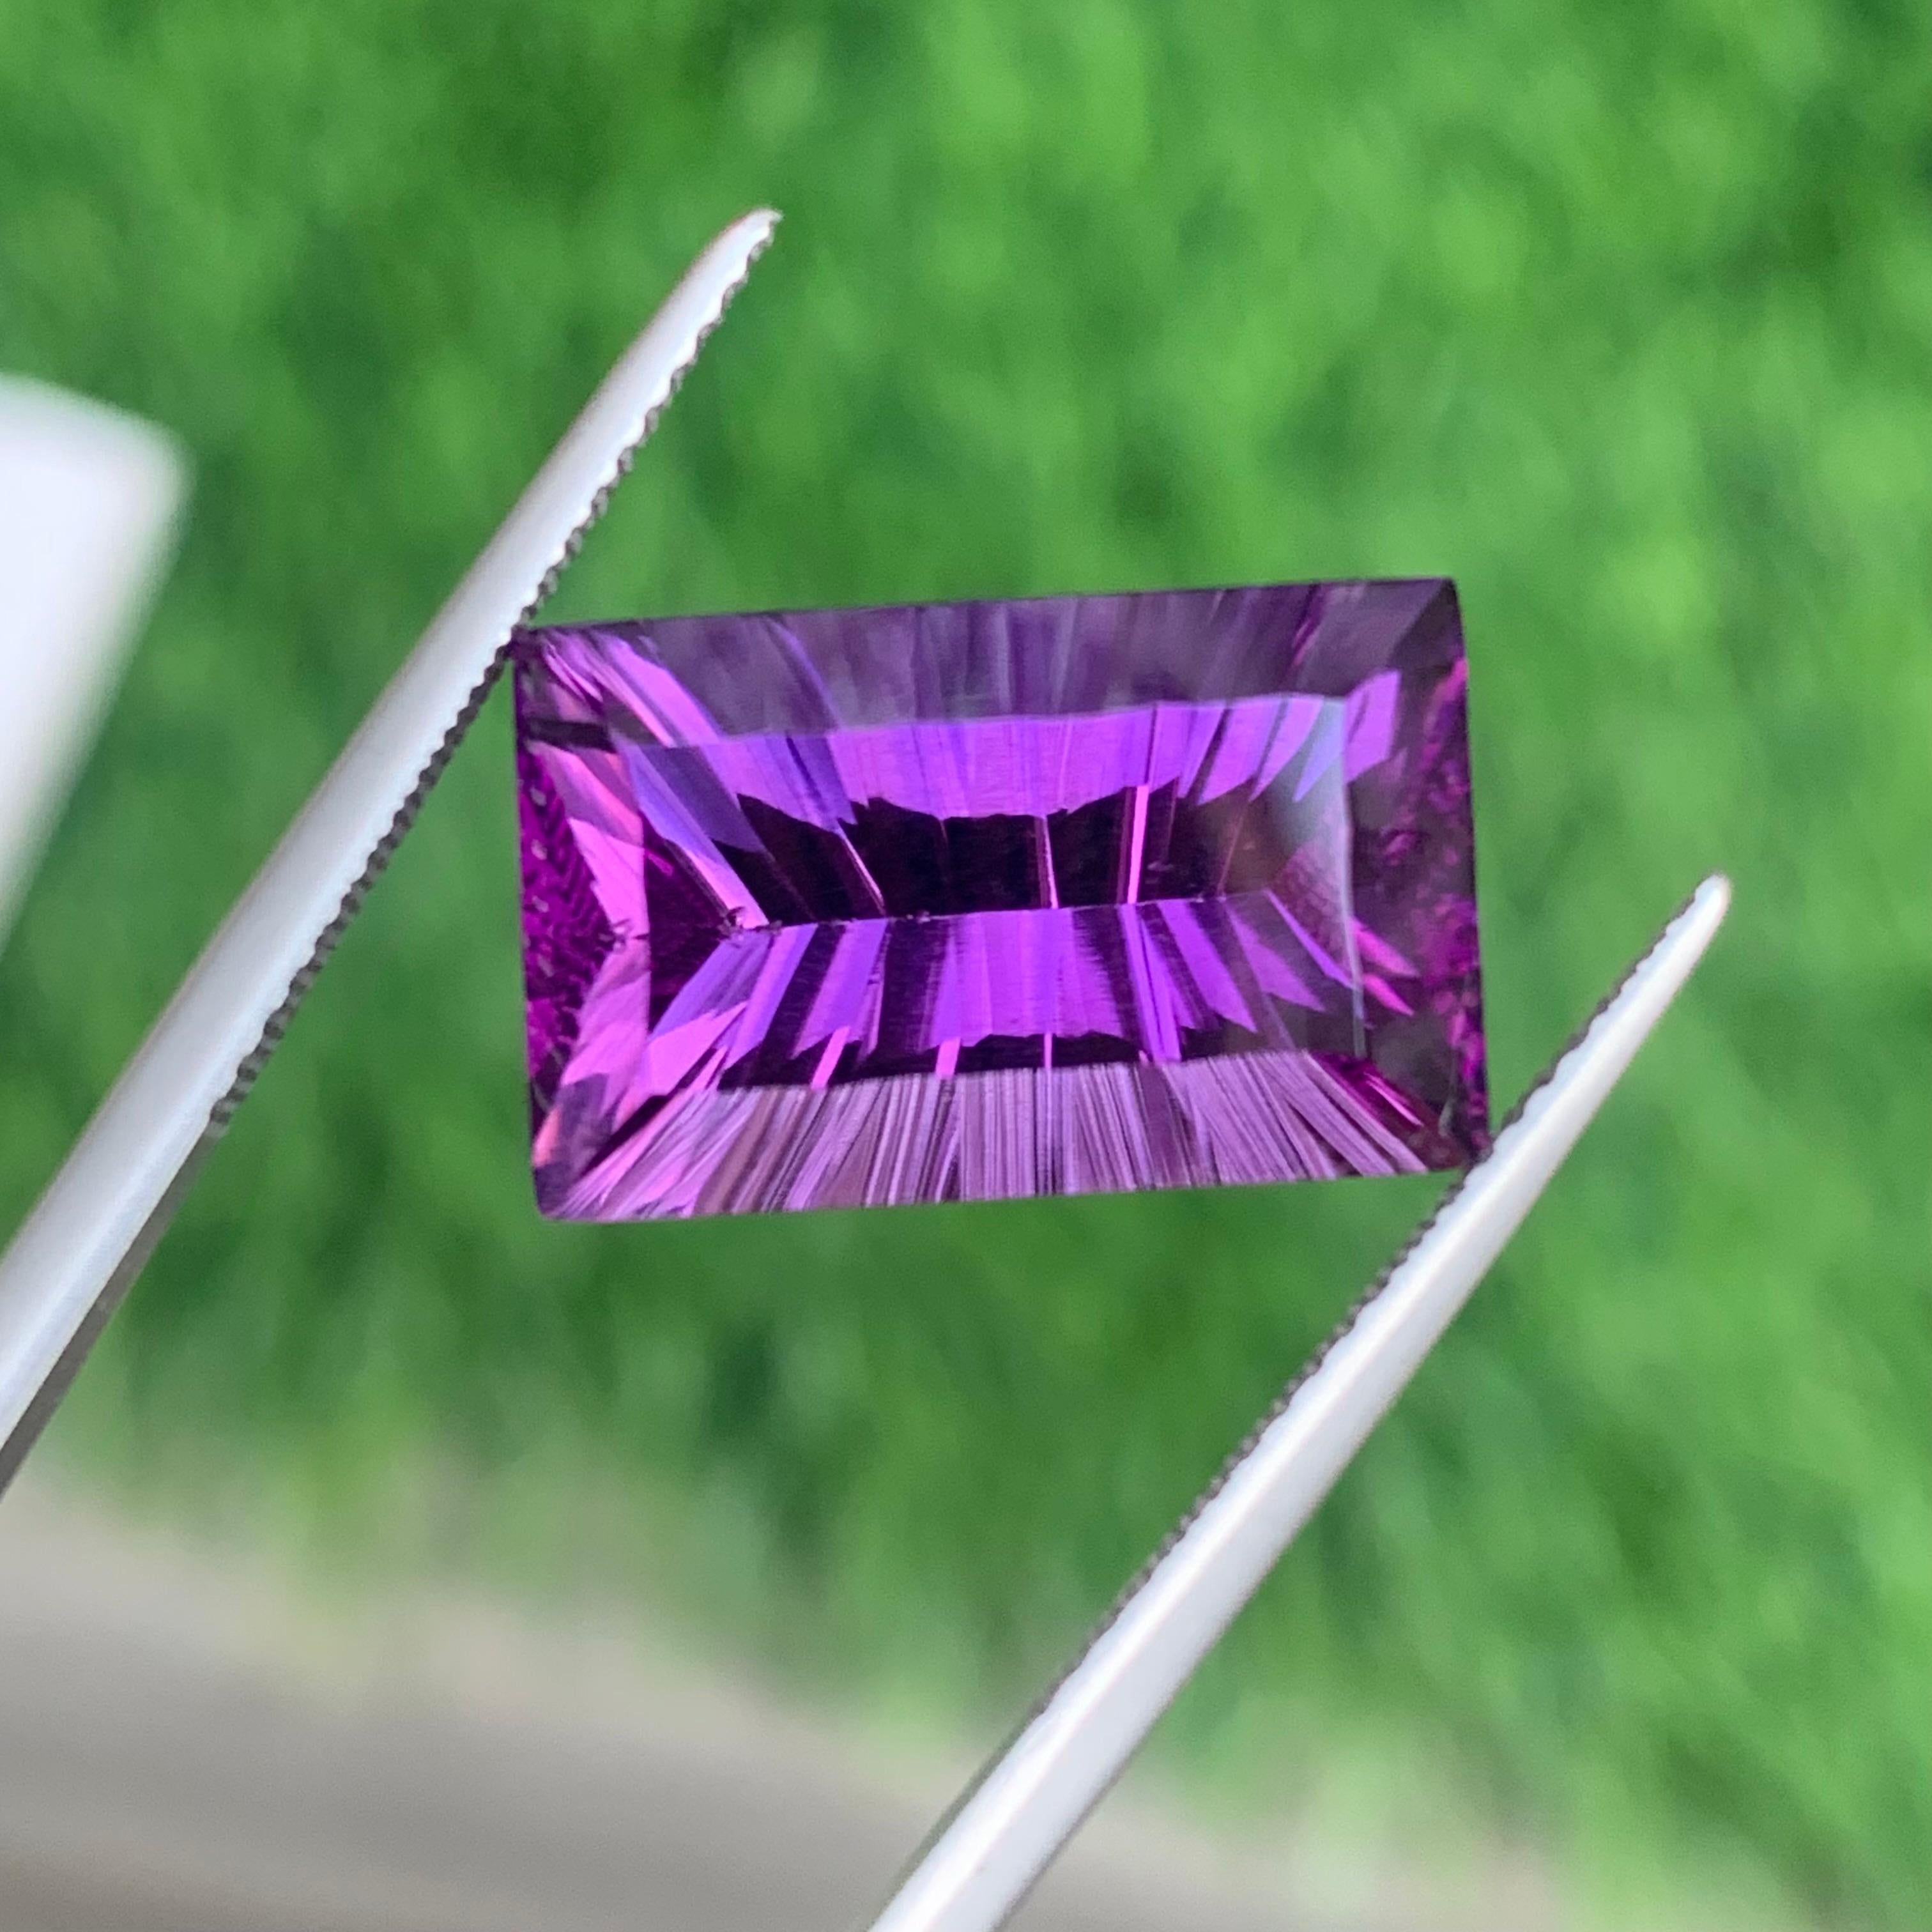 Faceted Amethyst
Weight: 10.35 Carats
Dimension: 16.2x10.5x8 Mm
Origin: Brazil
Color: Purple 
Shape:Emerald
Facet/Cut: Laser
Treatment: Non
Certificate: On Demand
Known as 